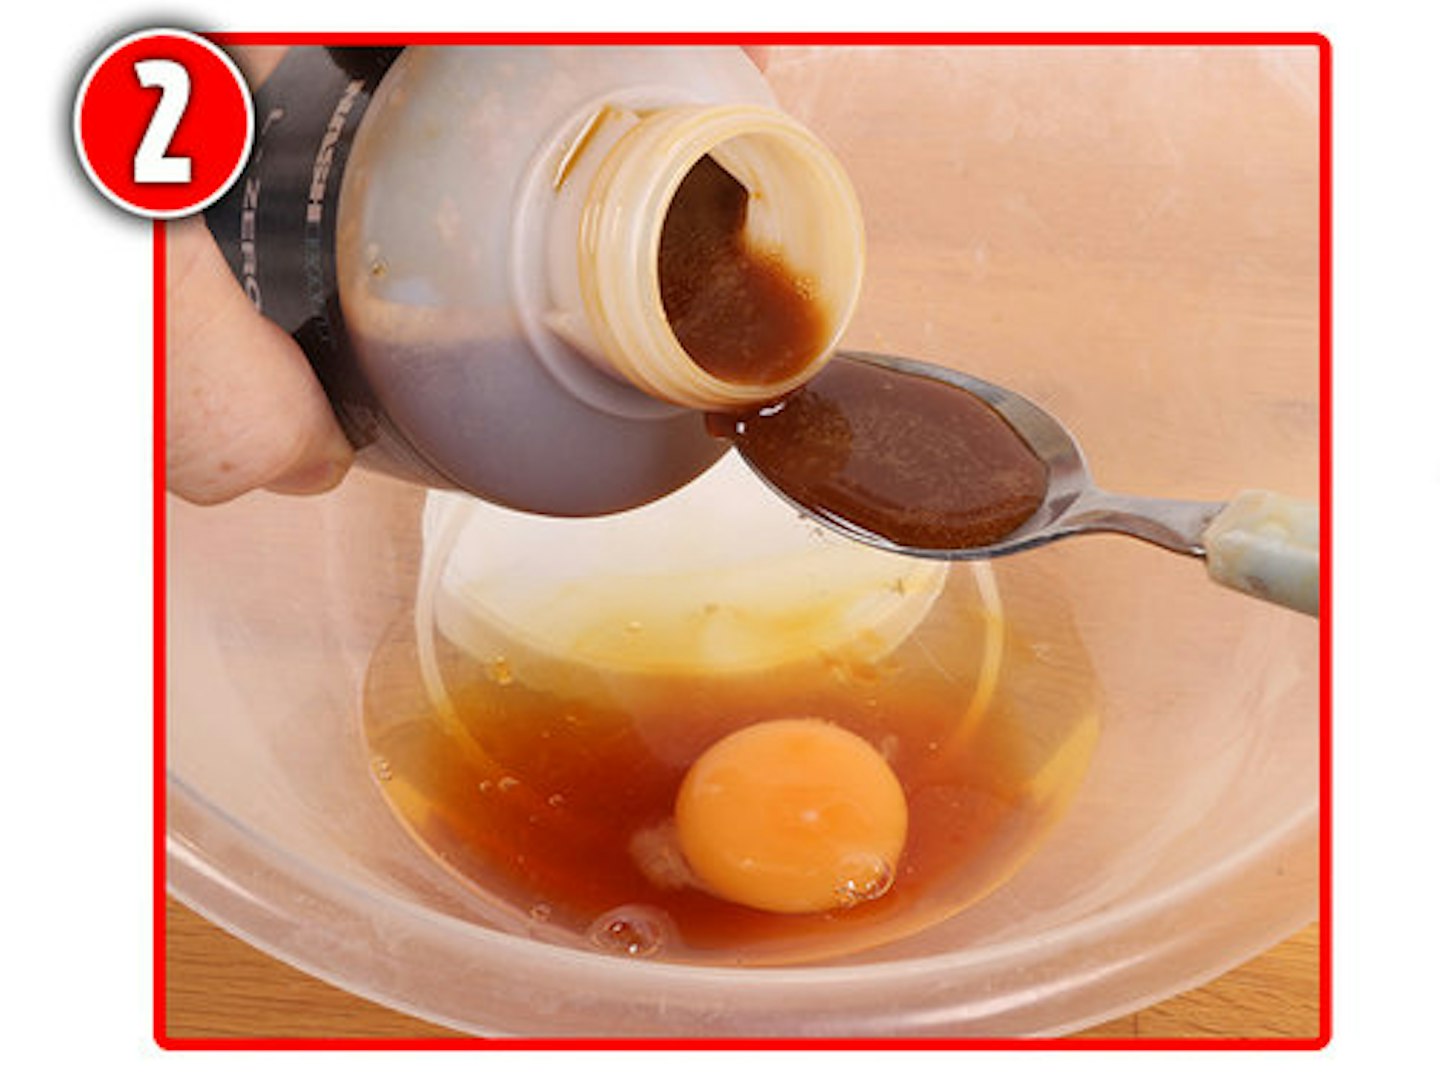 Crack four large eggs into a mixing bowl and add the liquid additives and food colouring.  